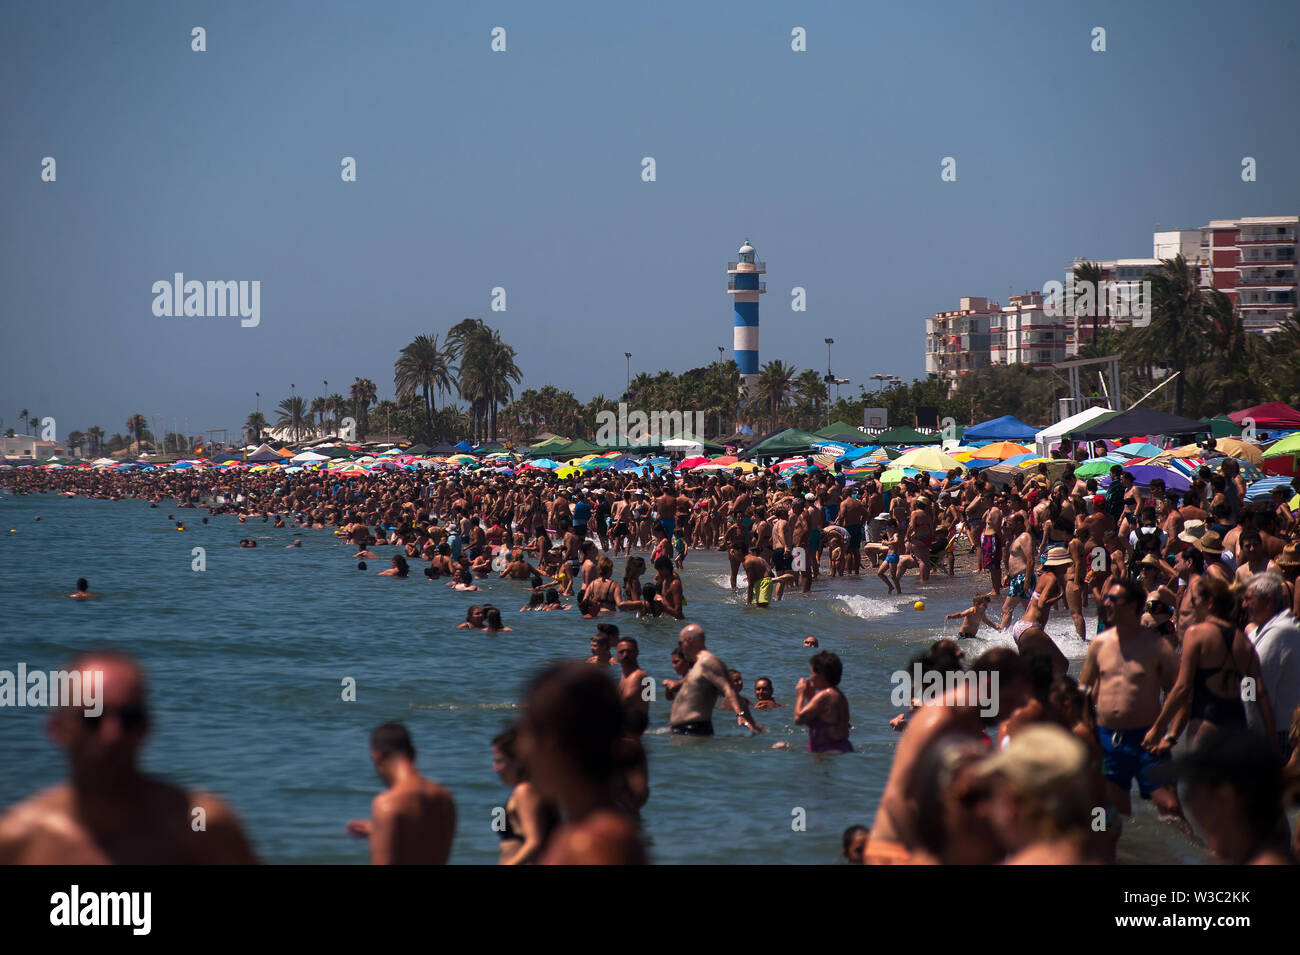 People enjoy the exhibitions of the Airshow on a hot summer day at a beach during the festival.The 2019 International Torre del Mar Airshow Festival is being hosted on 12,13 and 14 of July this year, attracting over 300,000 spectators. Members of different patrols perform with exhibitions and acrobatics during the festival. Stock Photo